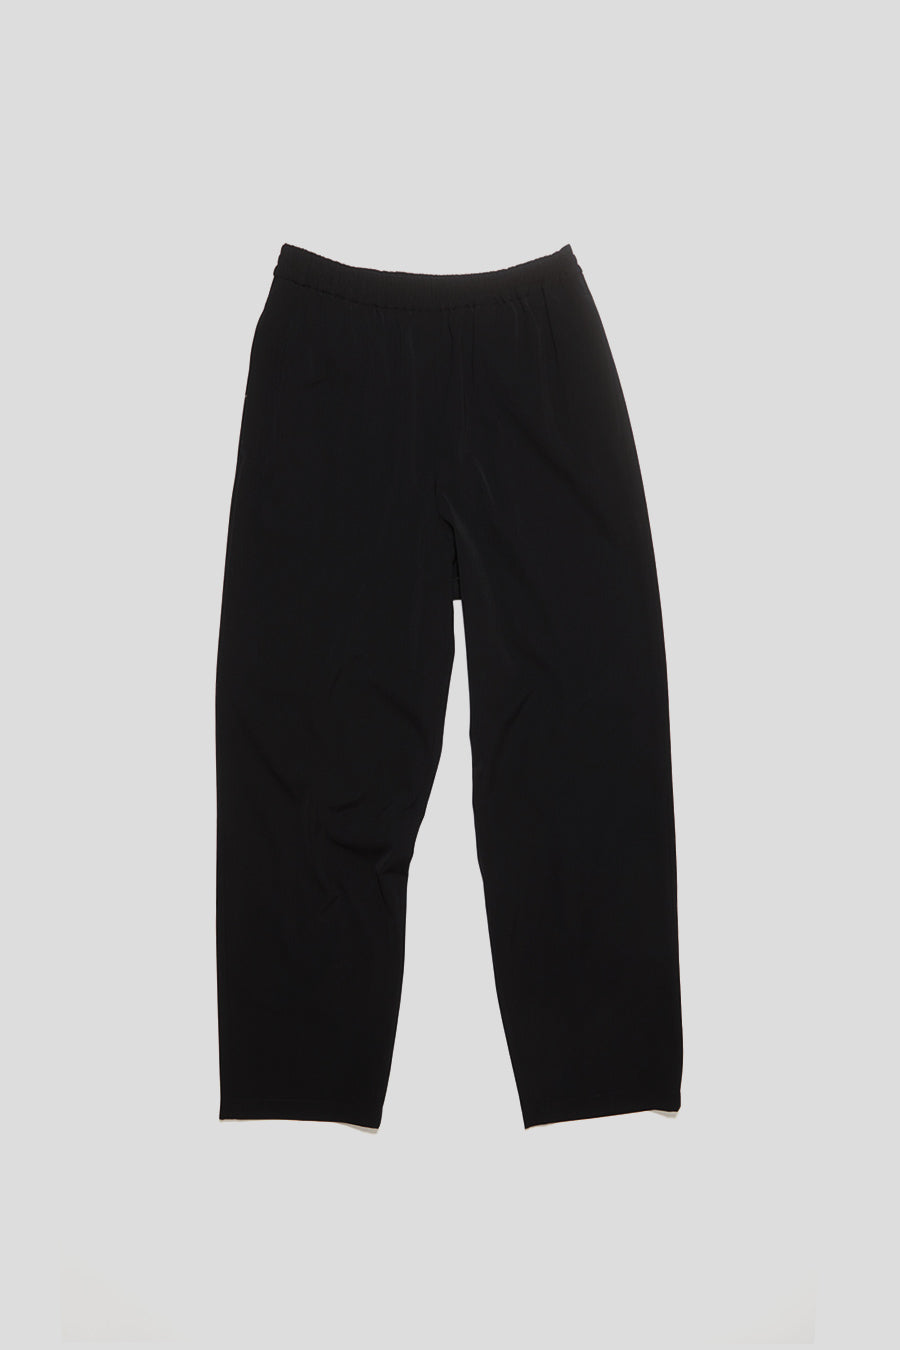 ACNE STUDIOS - RELAXED FIT TROUSERS BLACK - LE LABO STORE